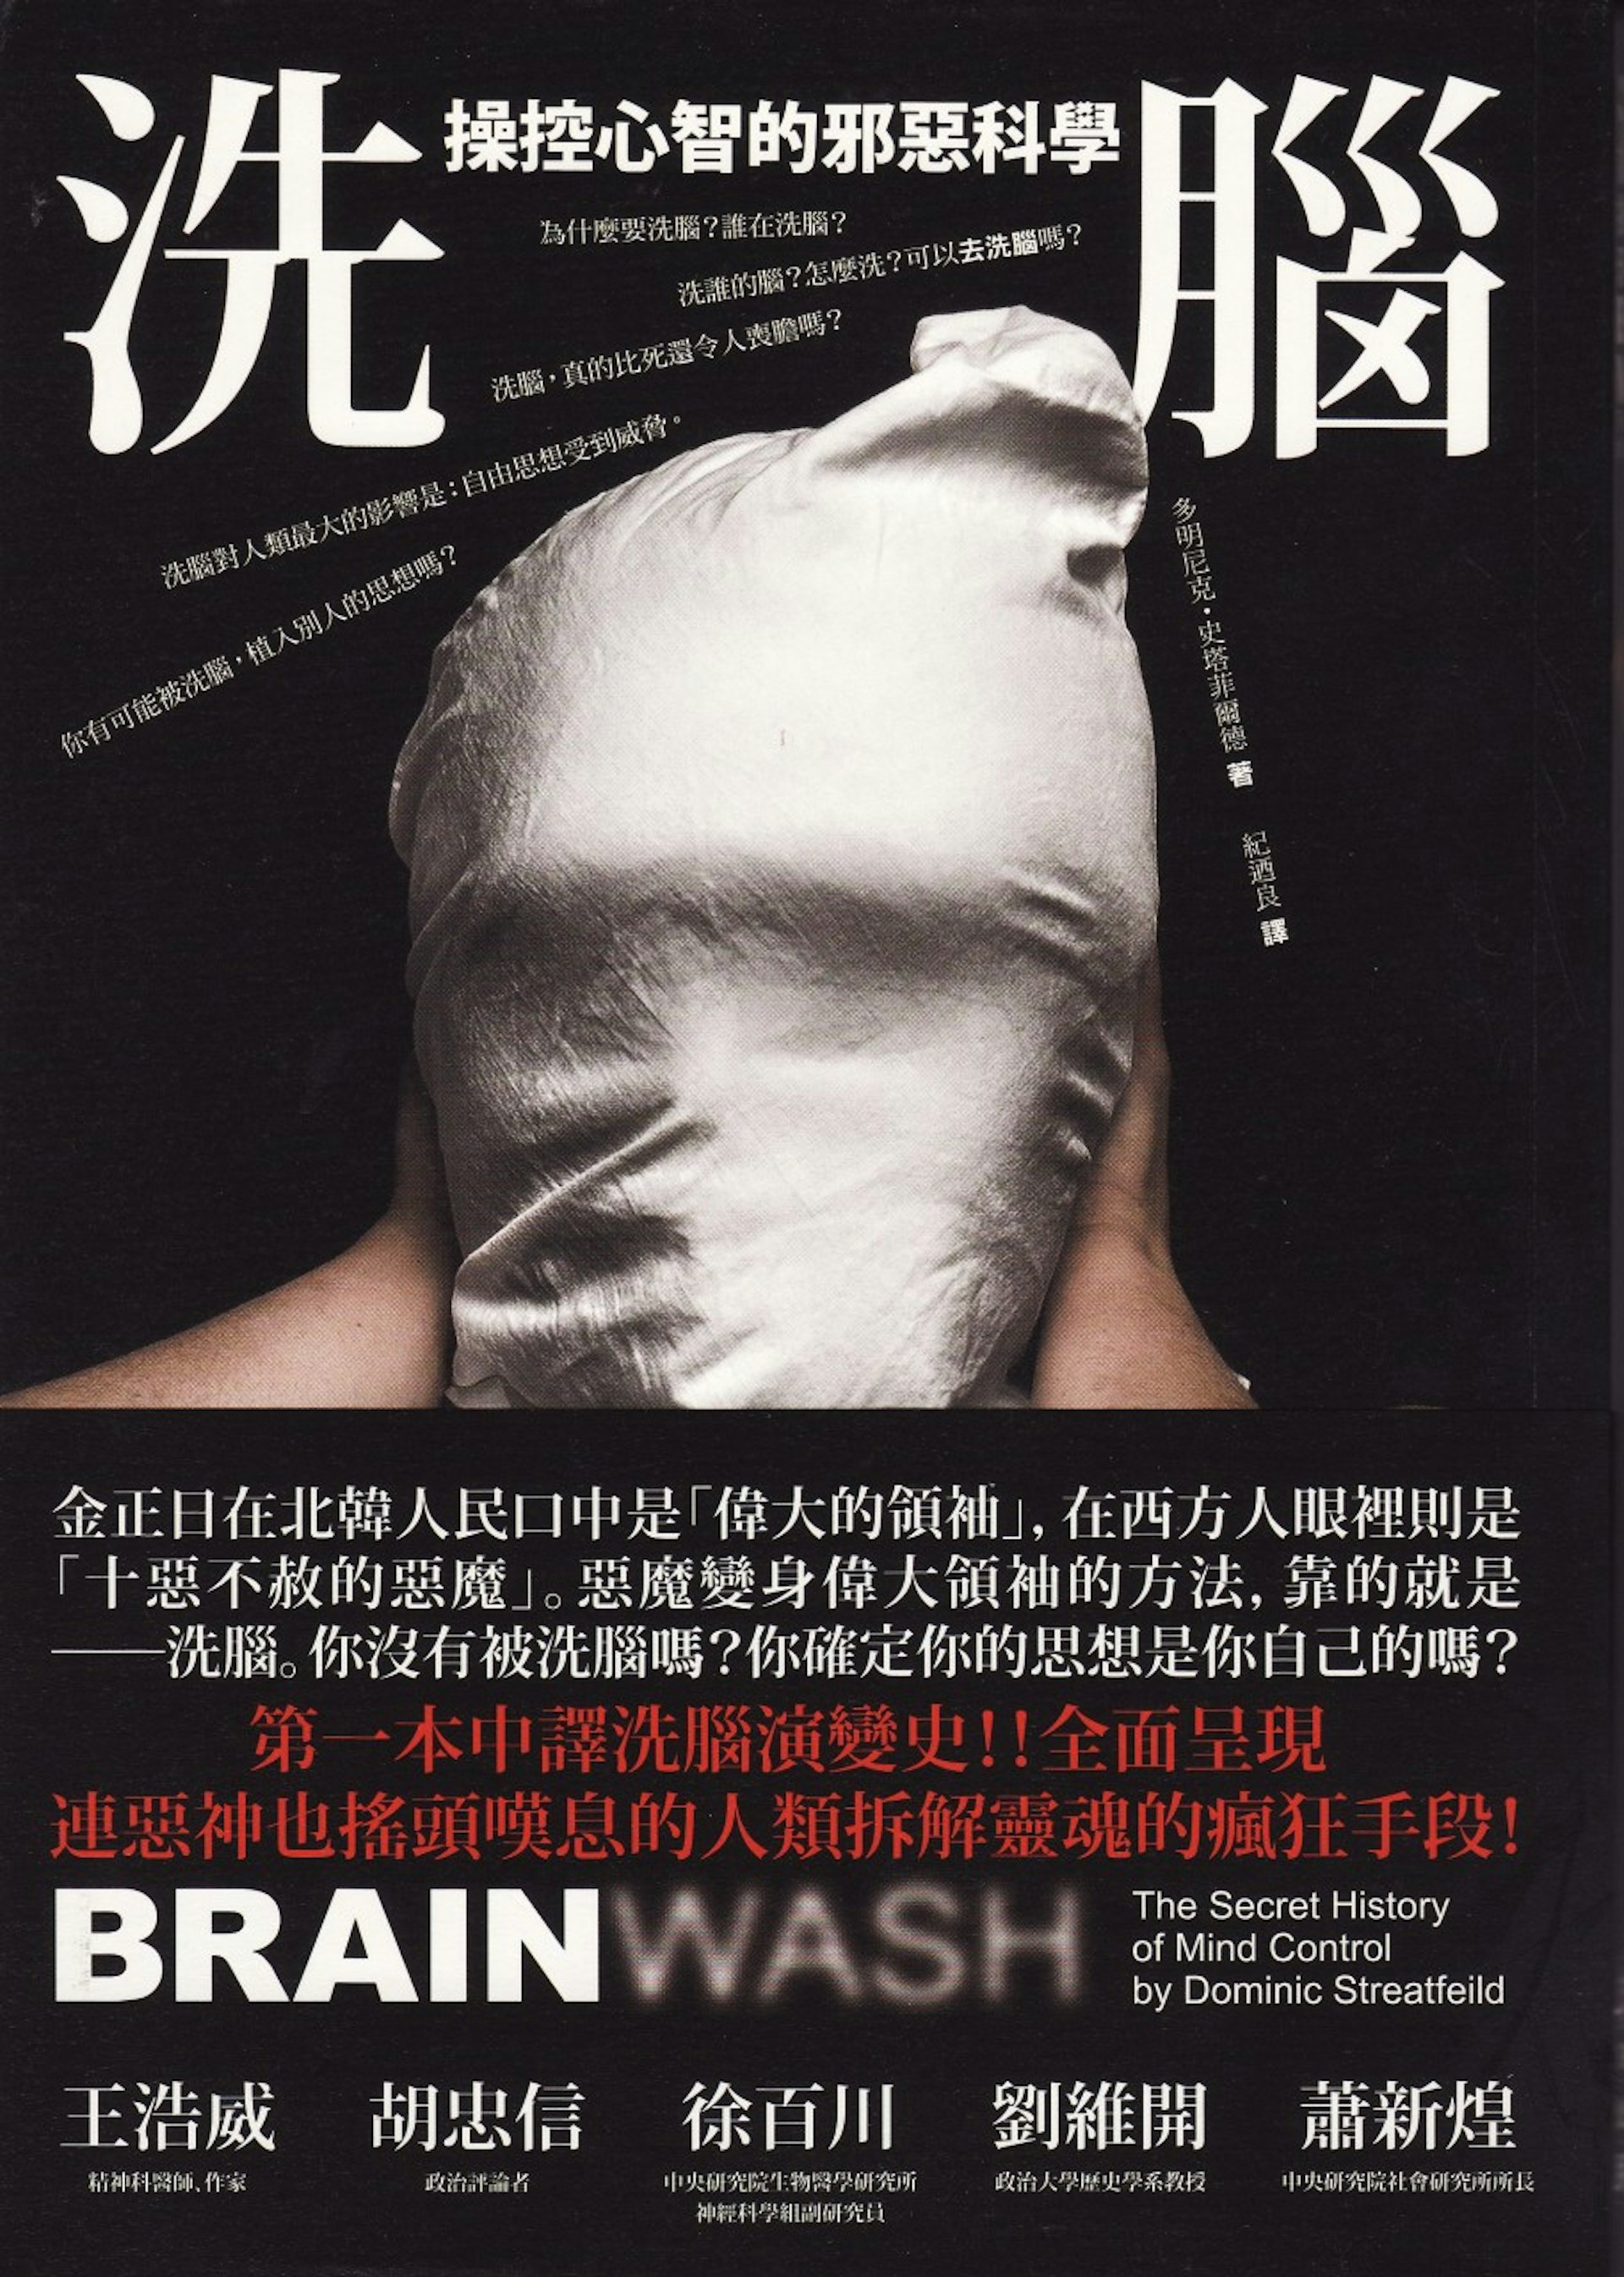 Brainwash: The Secret History of Mind Control by